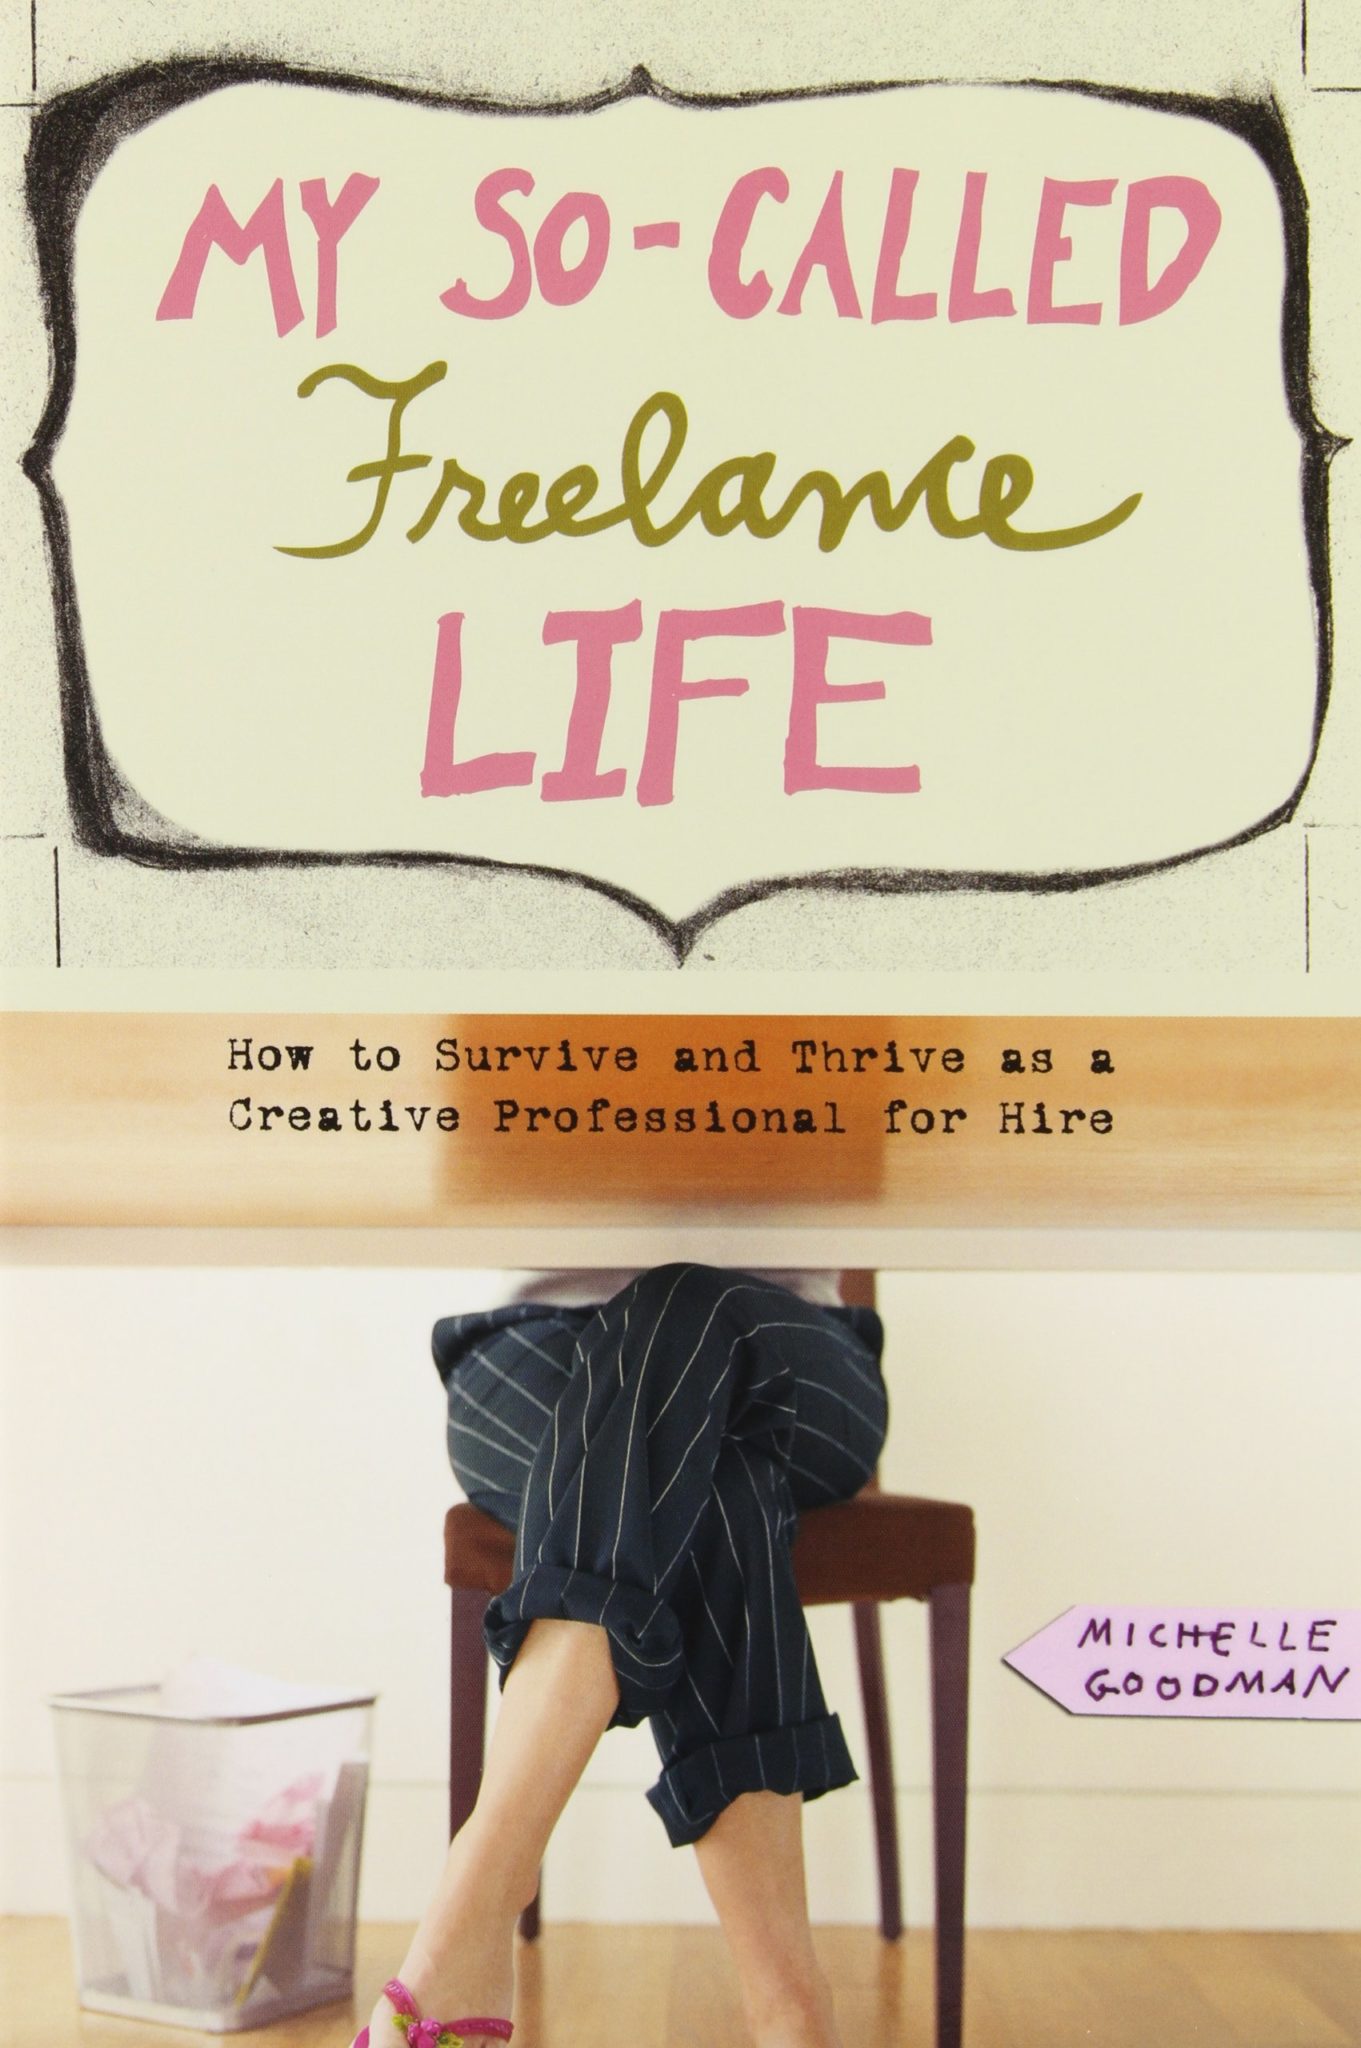 My So-Called Freelance Life: How to Survive and Thrive as a Creative Professional for Hire